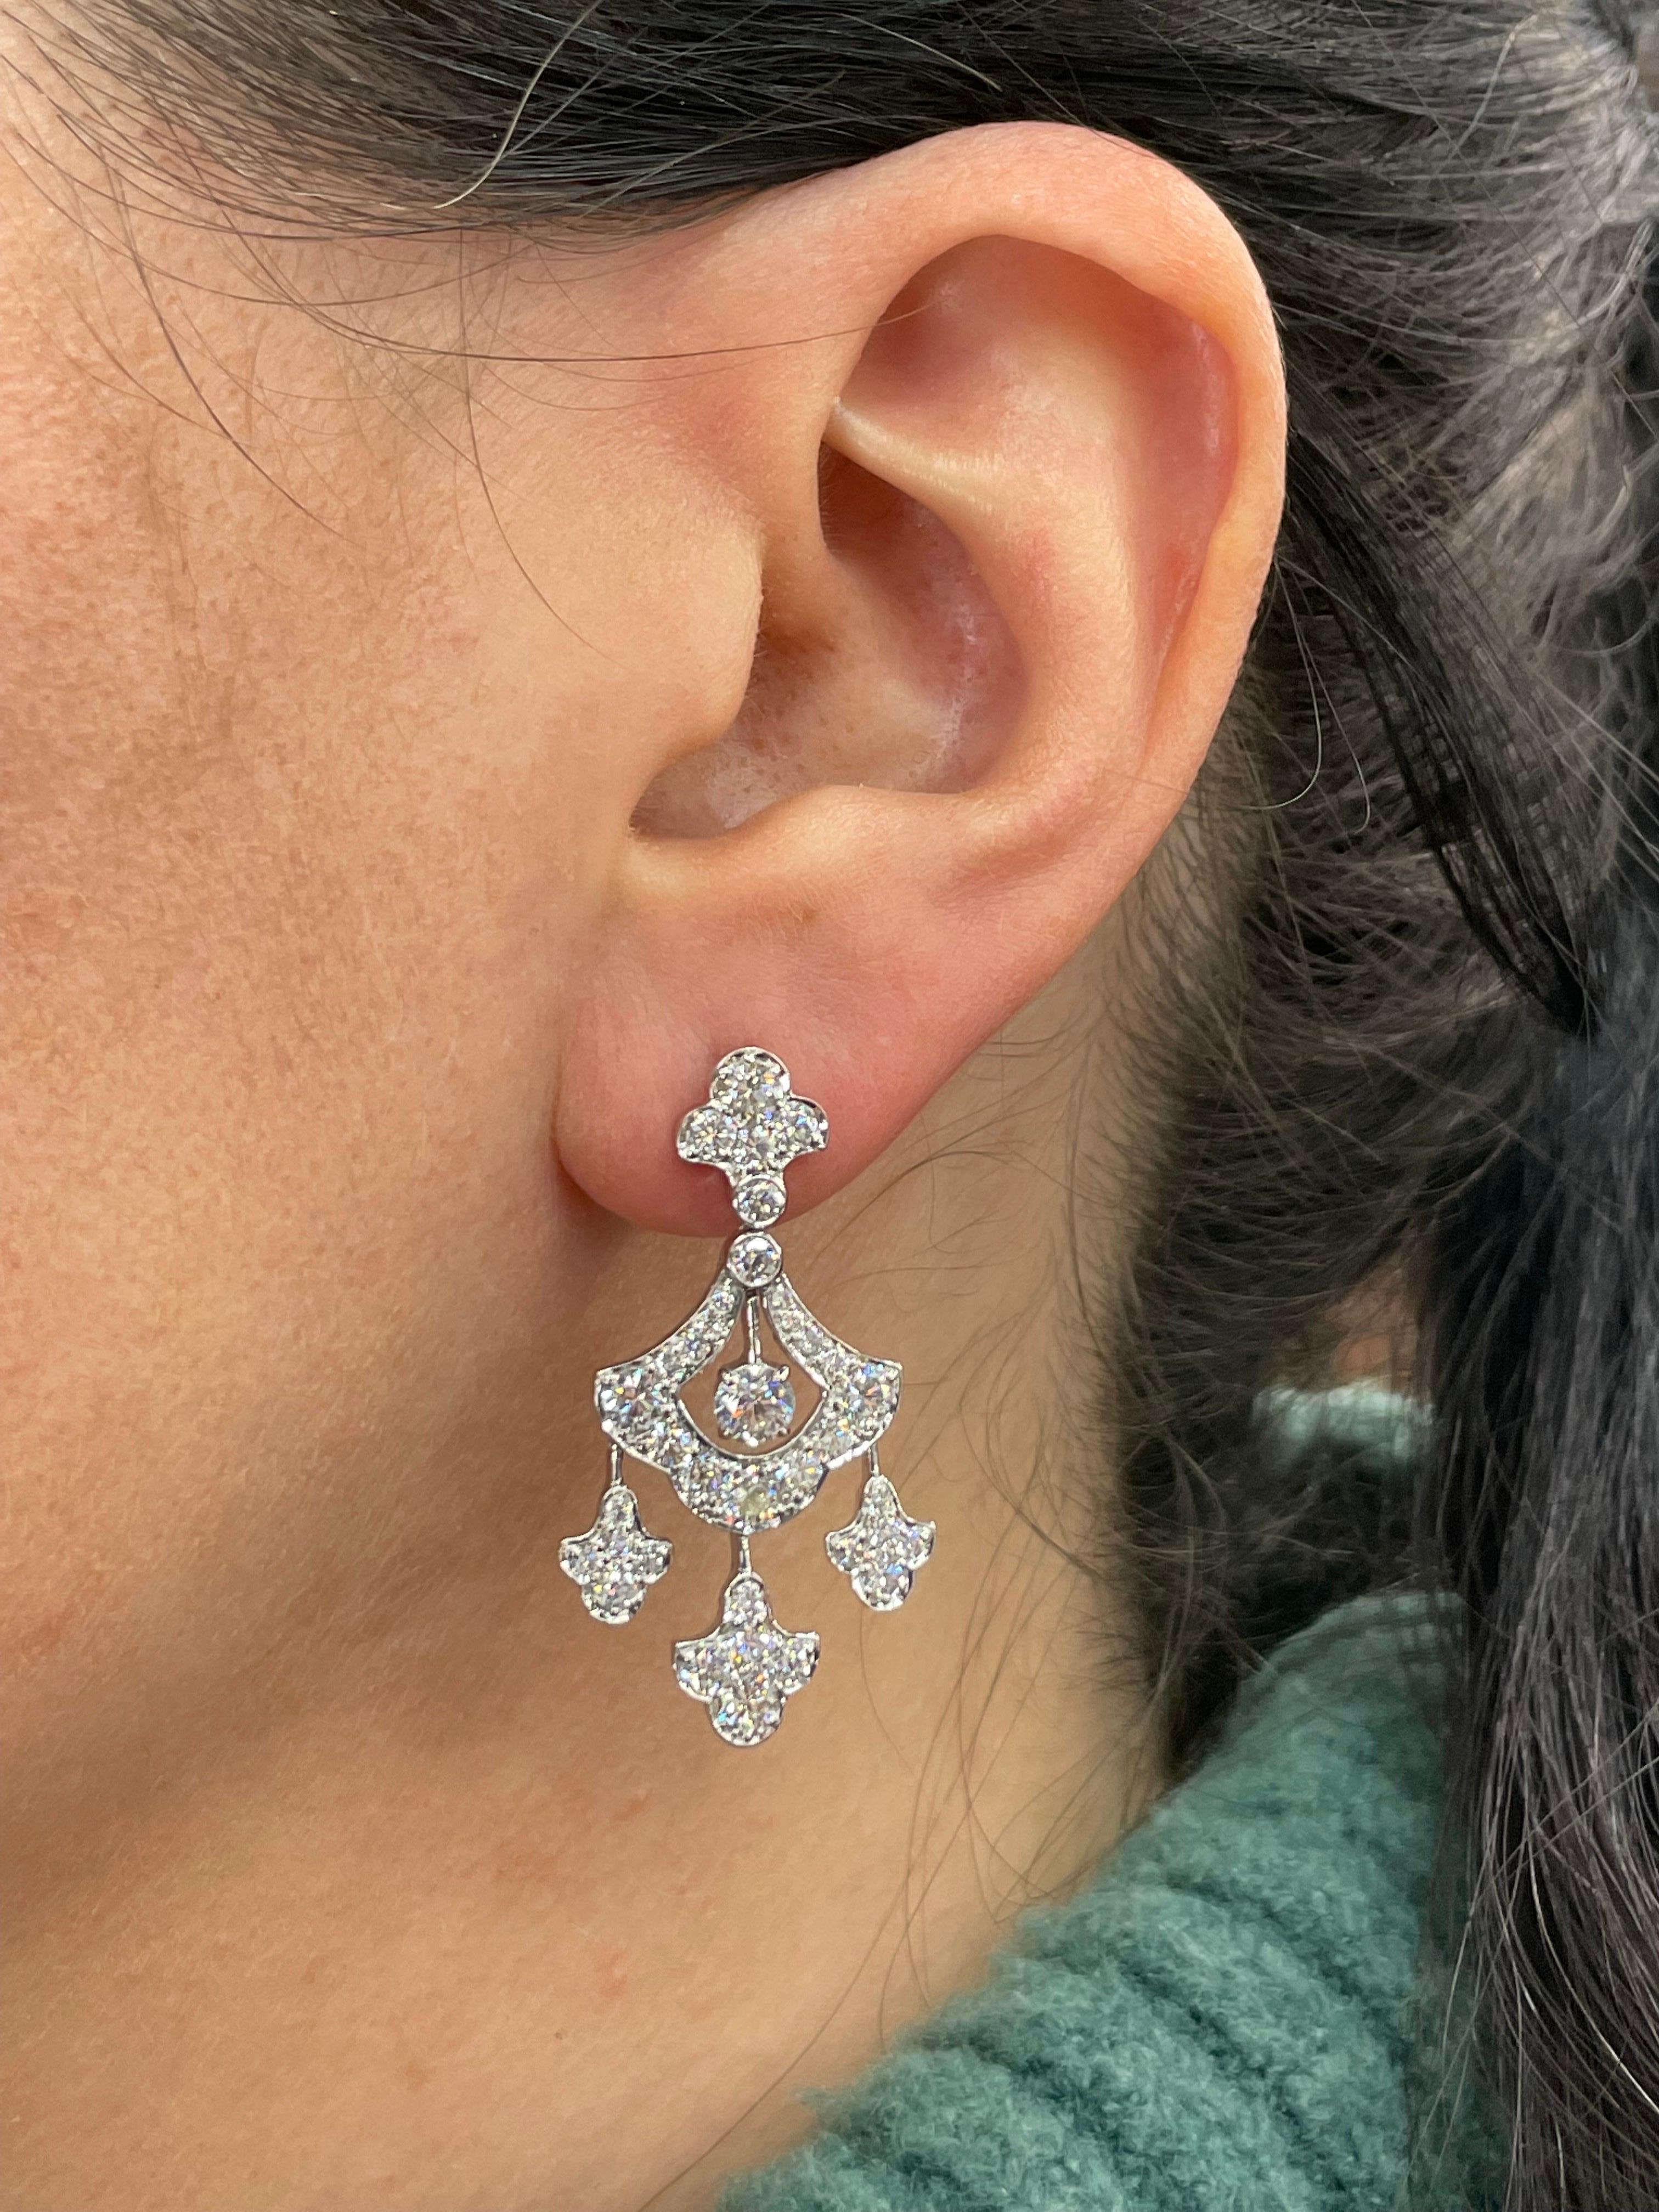 18 Karat White Gold drop dangle earrings featuring 72 Round Brilliants weighing 3.98 Carats. 
Color G-H Clarity SI
Bottom Drops have movement. 